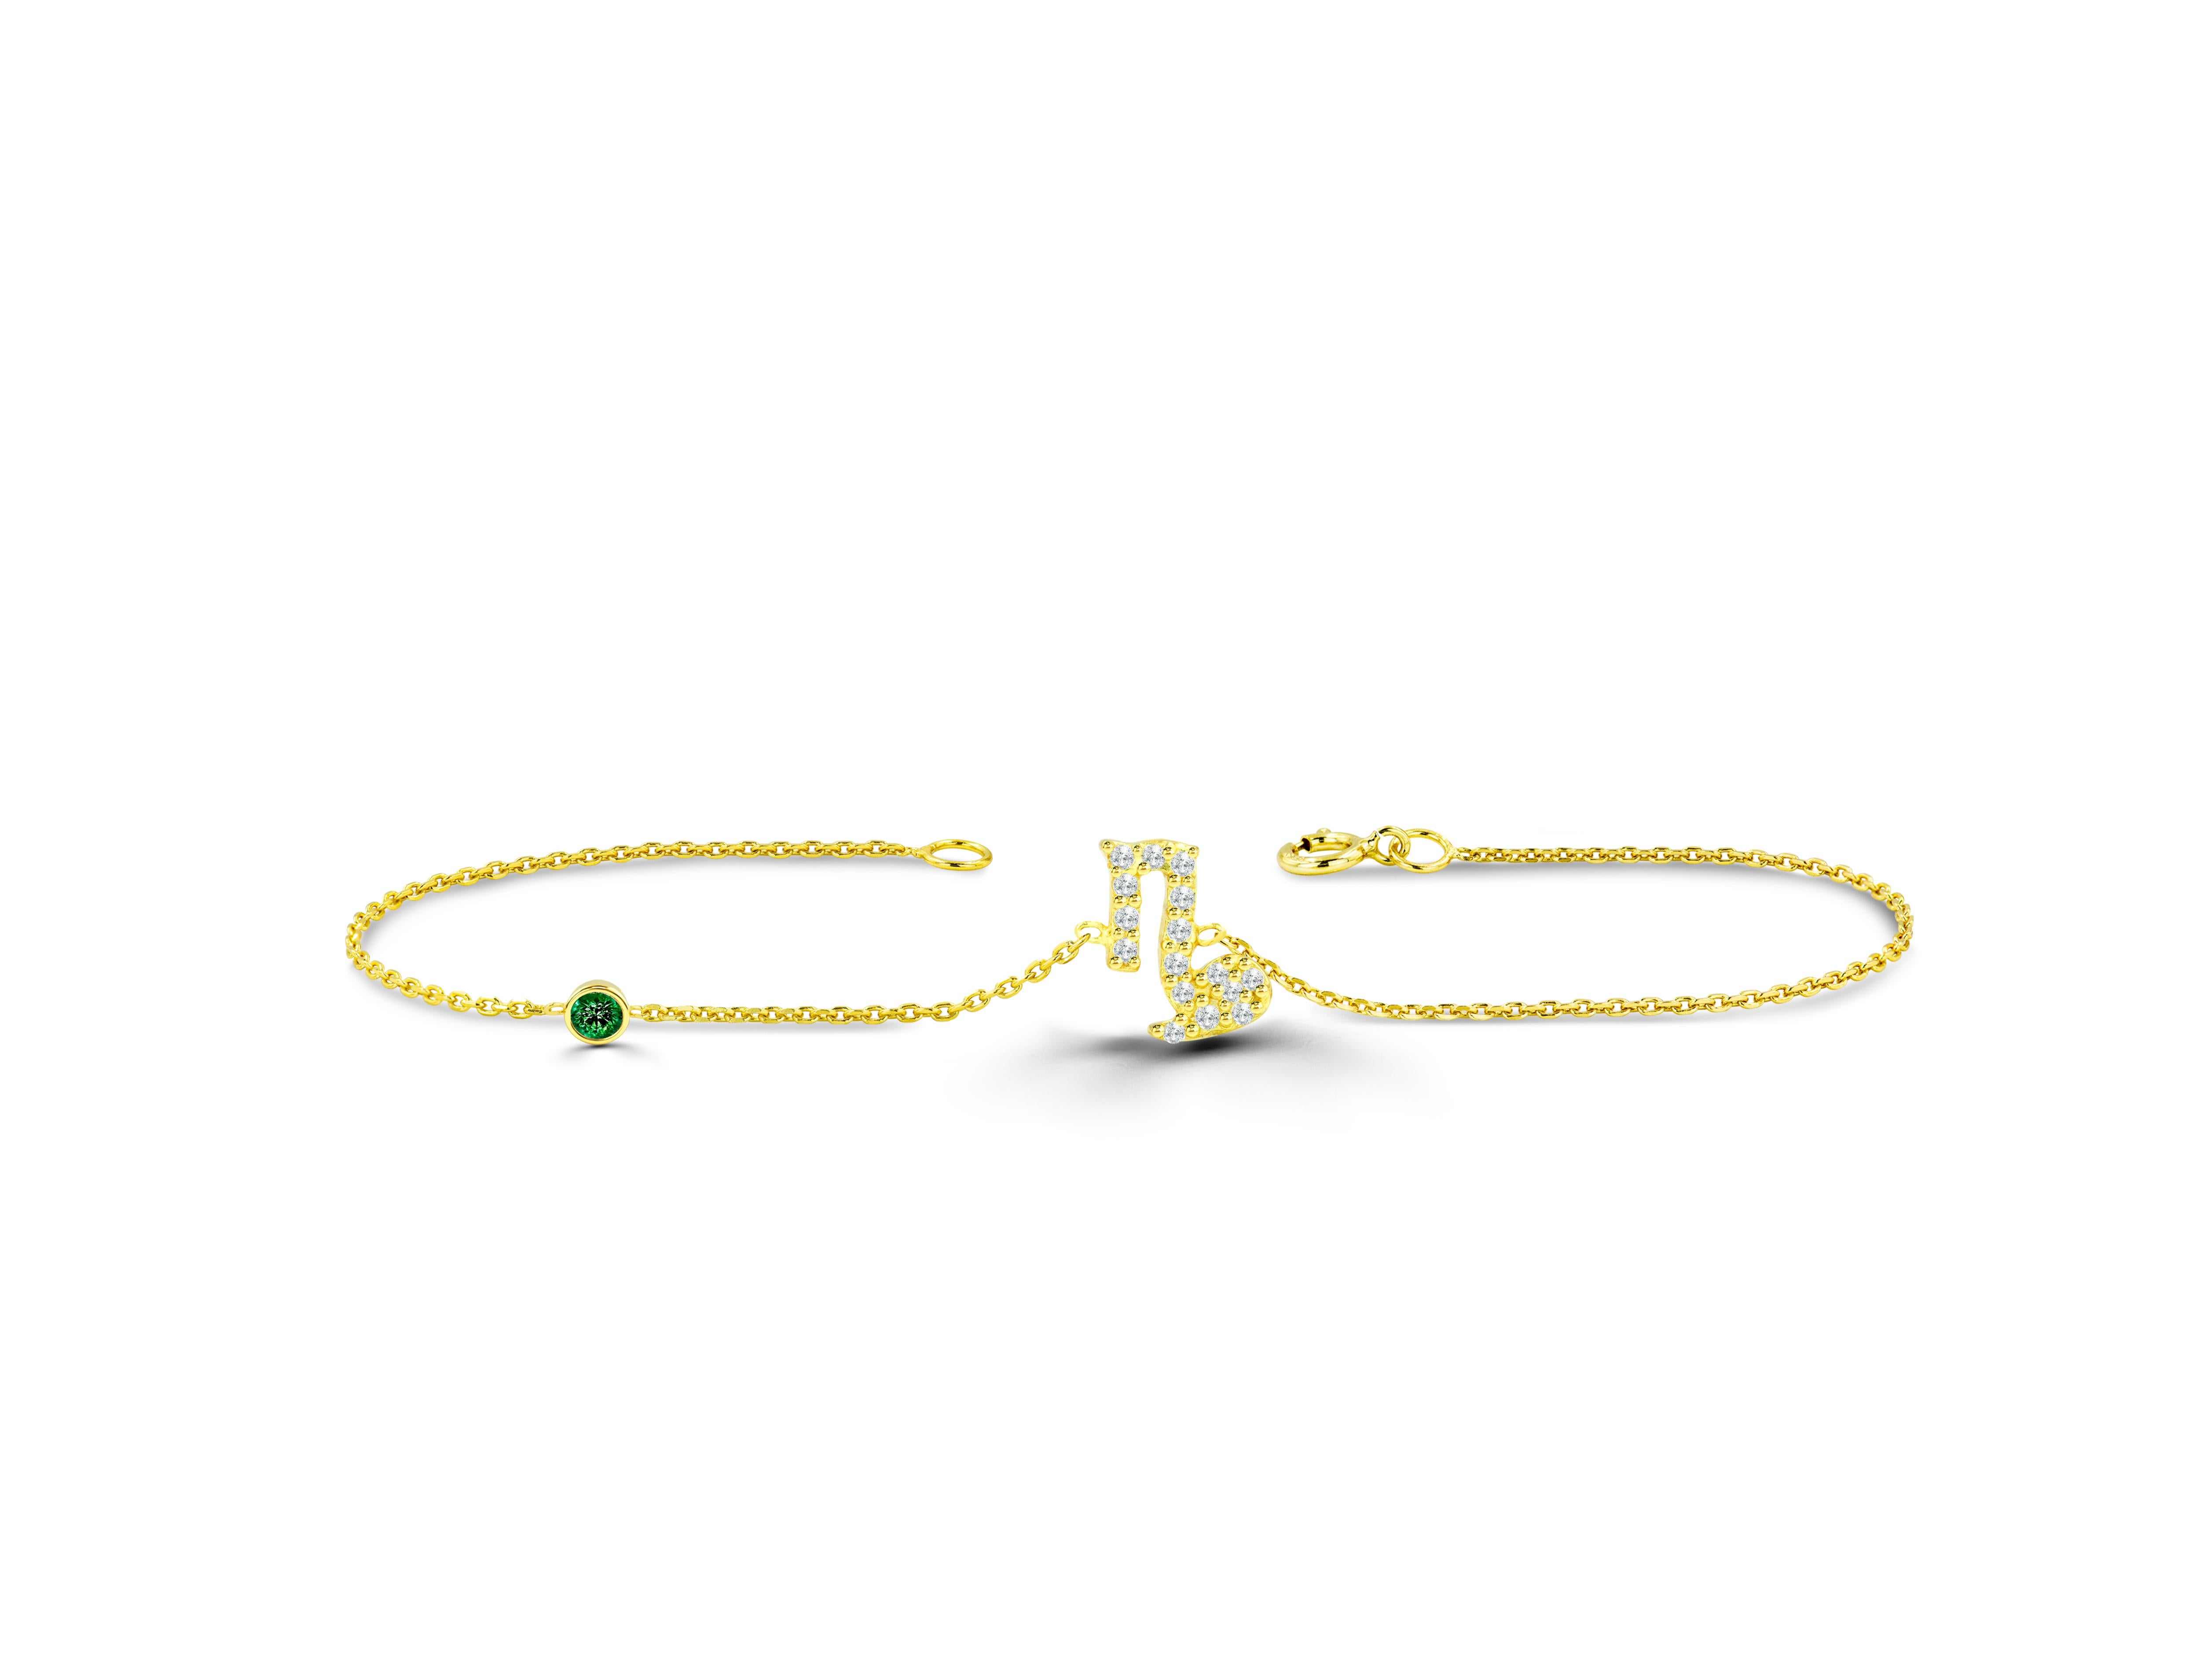 This Capricorn Diamond Bracelet is meant to represent you. This Zodiac sign bracelet comes with a birthstone of your choice- Ruby, Sapphire, or Emerald. Our collection of zodiac jewelry includes this stunning Diamond Capricorn Bracelet. All